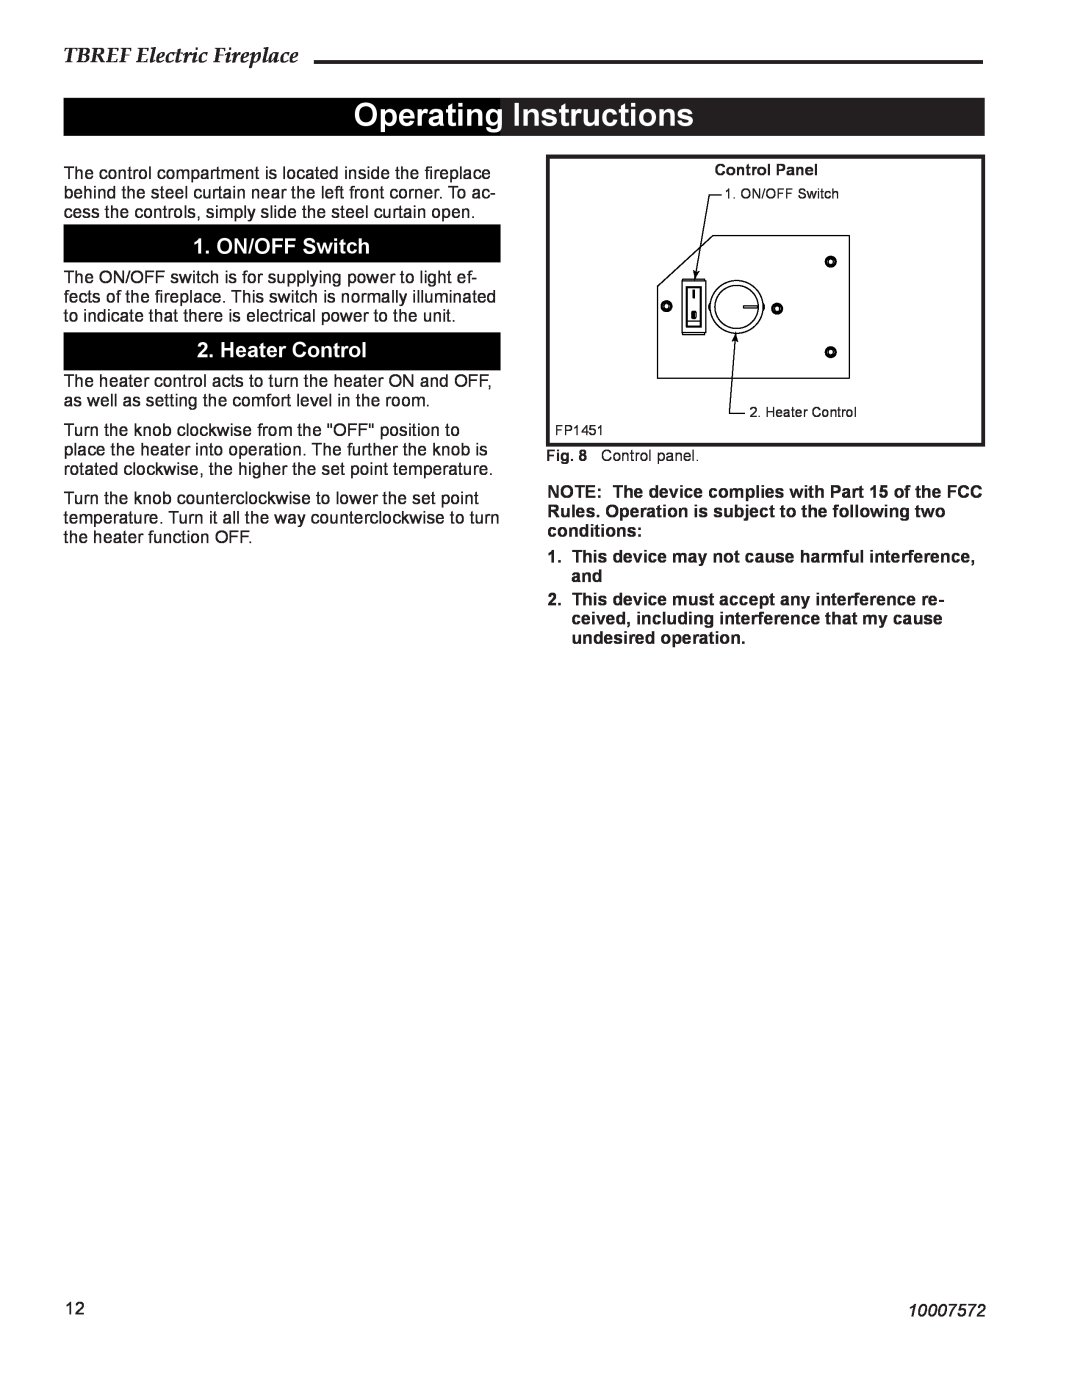 Vermont Casting TBREF36NH Operating Instructions, 1. ON/OFF Switch, Heater Control, TBREF Electric Fireplace, 10007572 